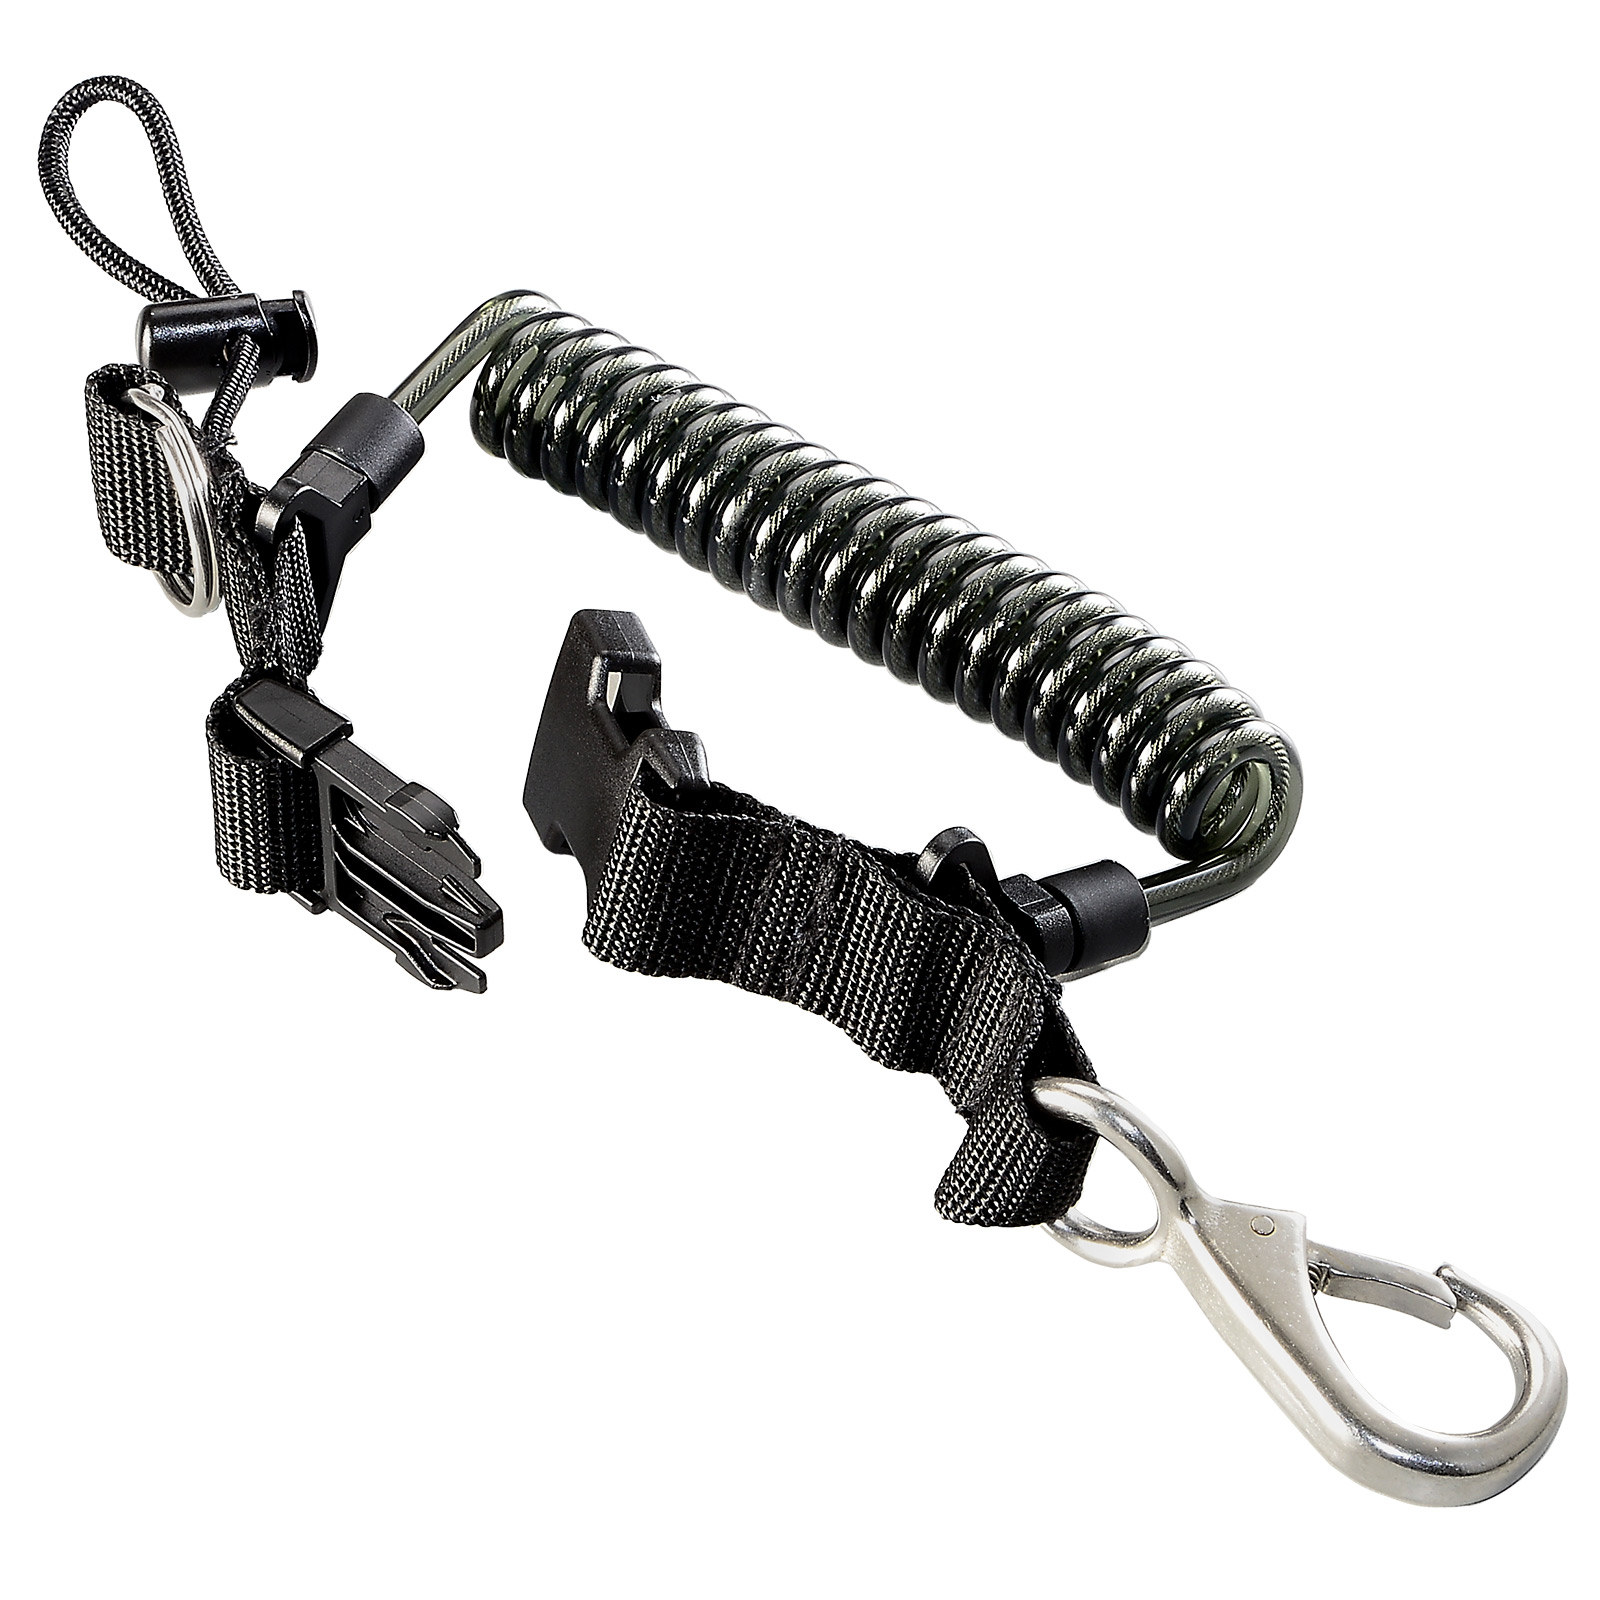 SP7A-1 Stainless Wire-Reinforced Coil Lanyard